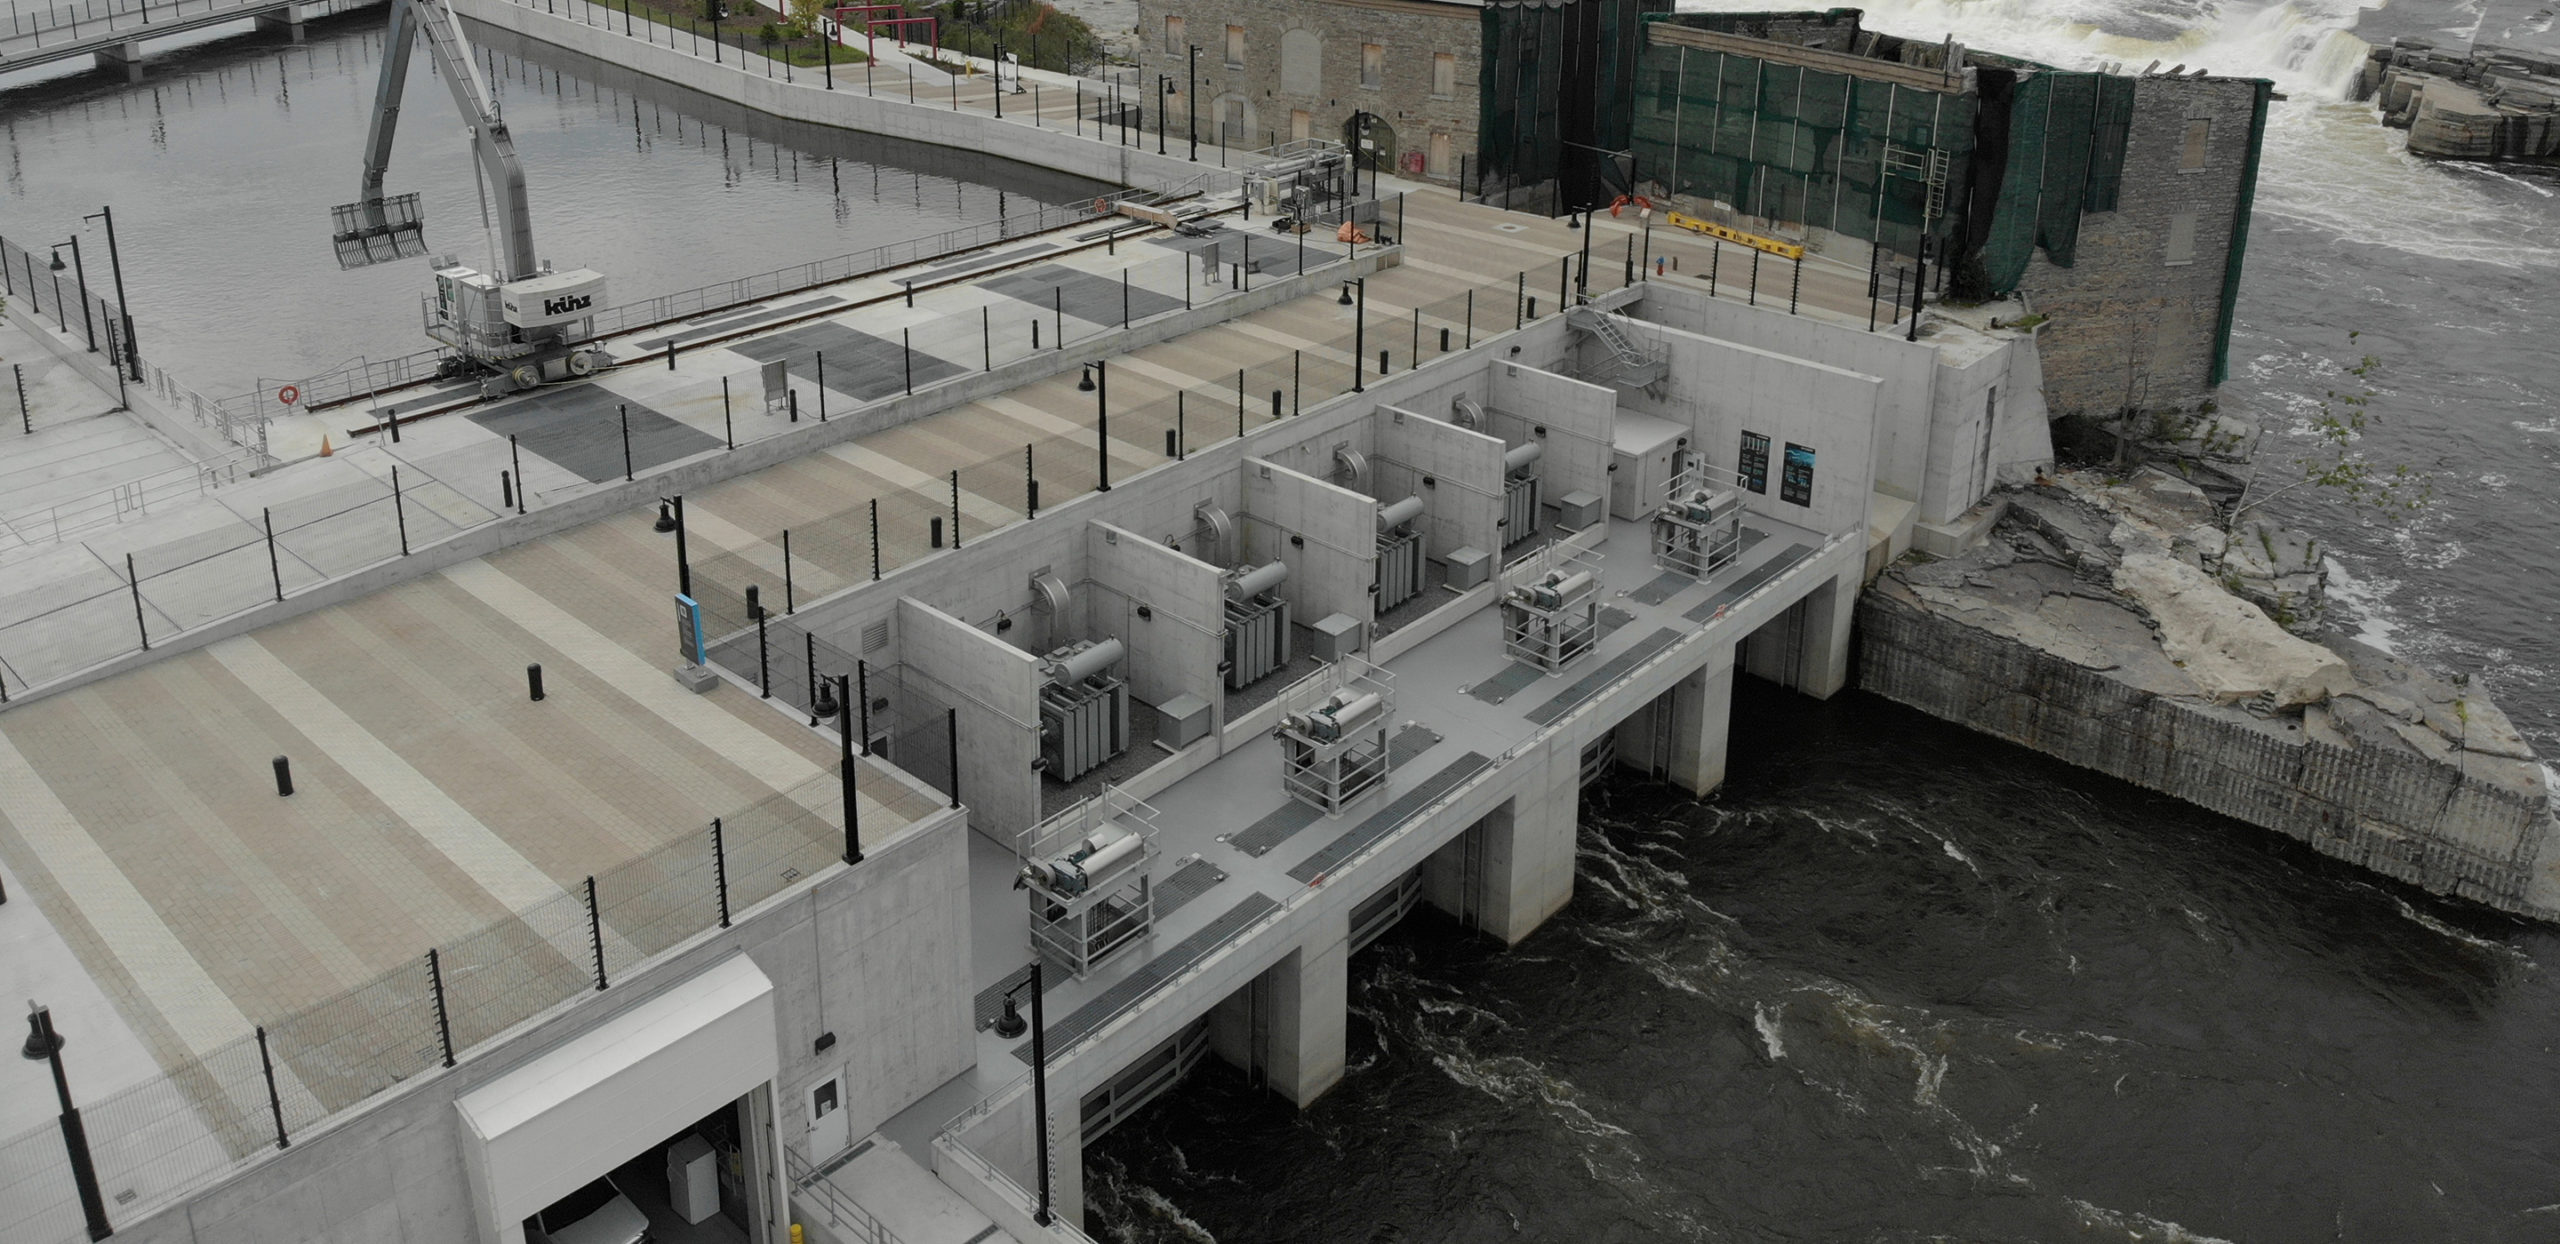 Chaudière Falls Generating Station No. 5: Preserving the past while powering a sustainable future